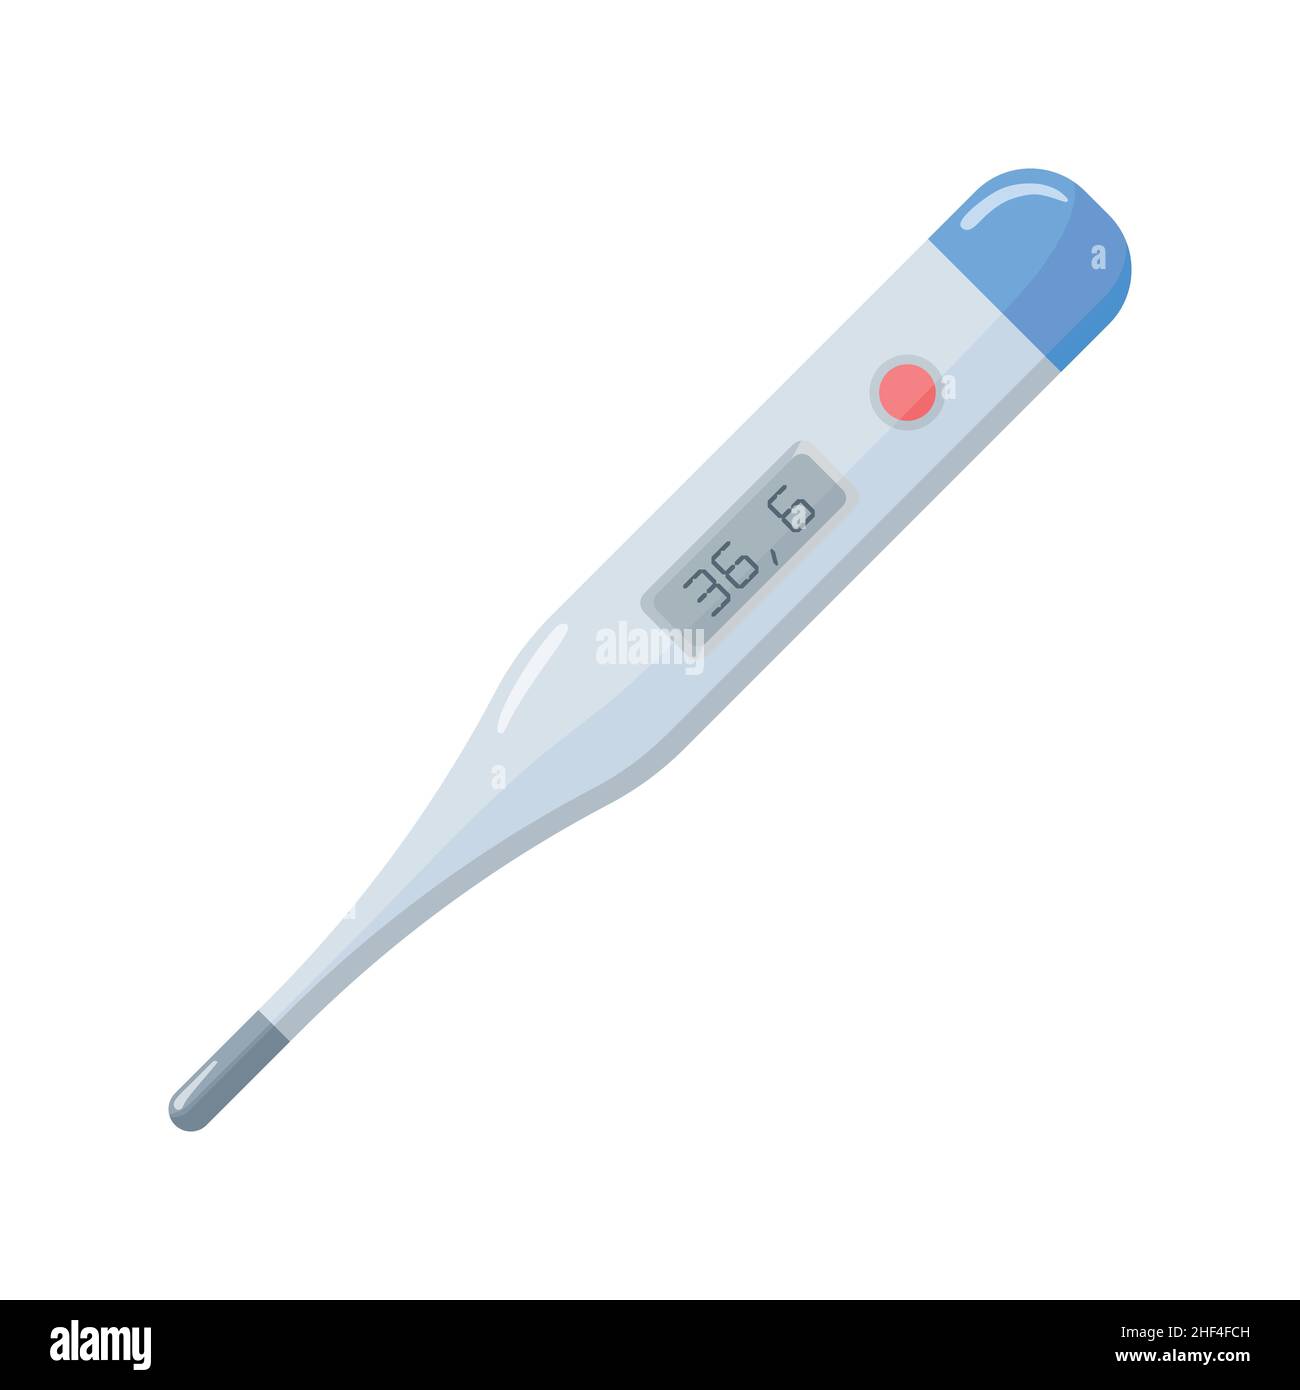 Medical electronic thermometer. A device for measuring body temperature. Cartoon flat style. Isolated vector illustration on white background. Stock Vector